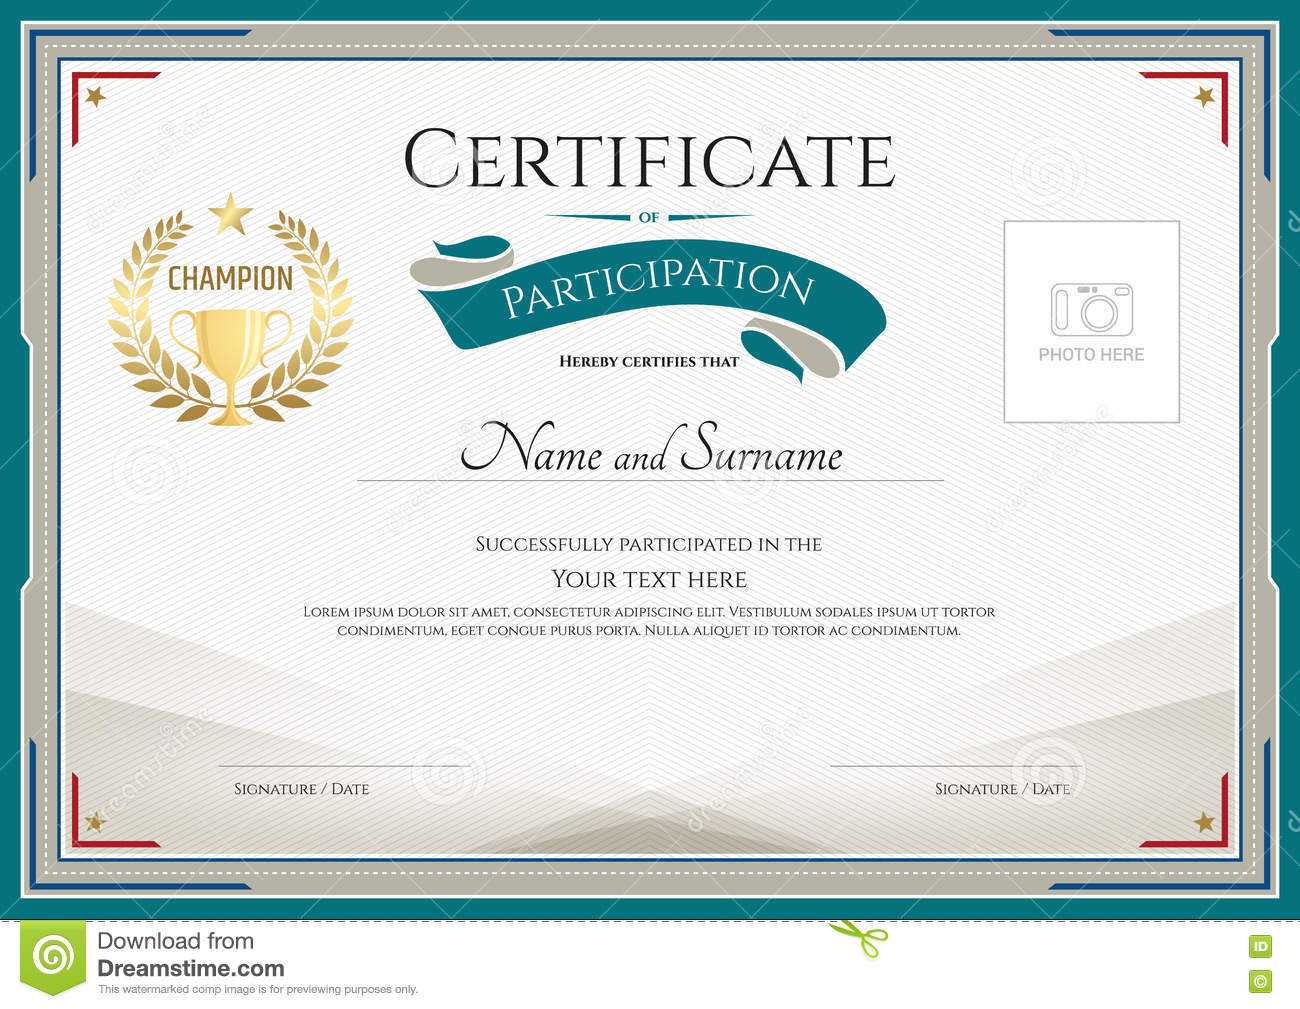 Certificate Of Participation Template With Green Broder Inside Certification Of Participation Free Template